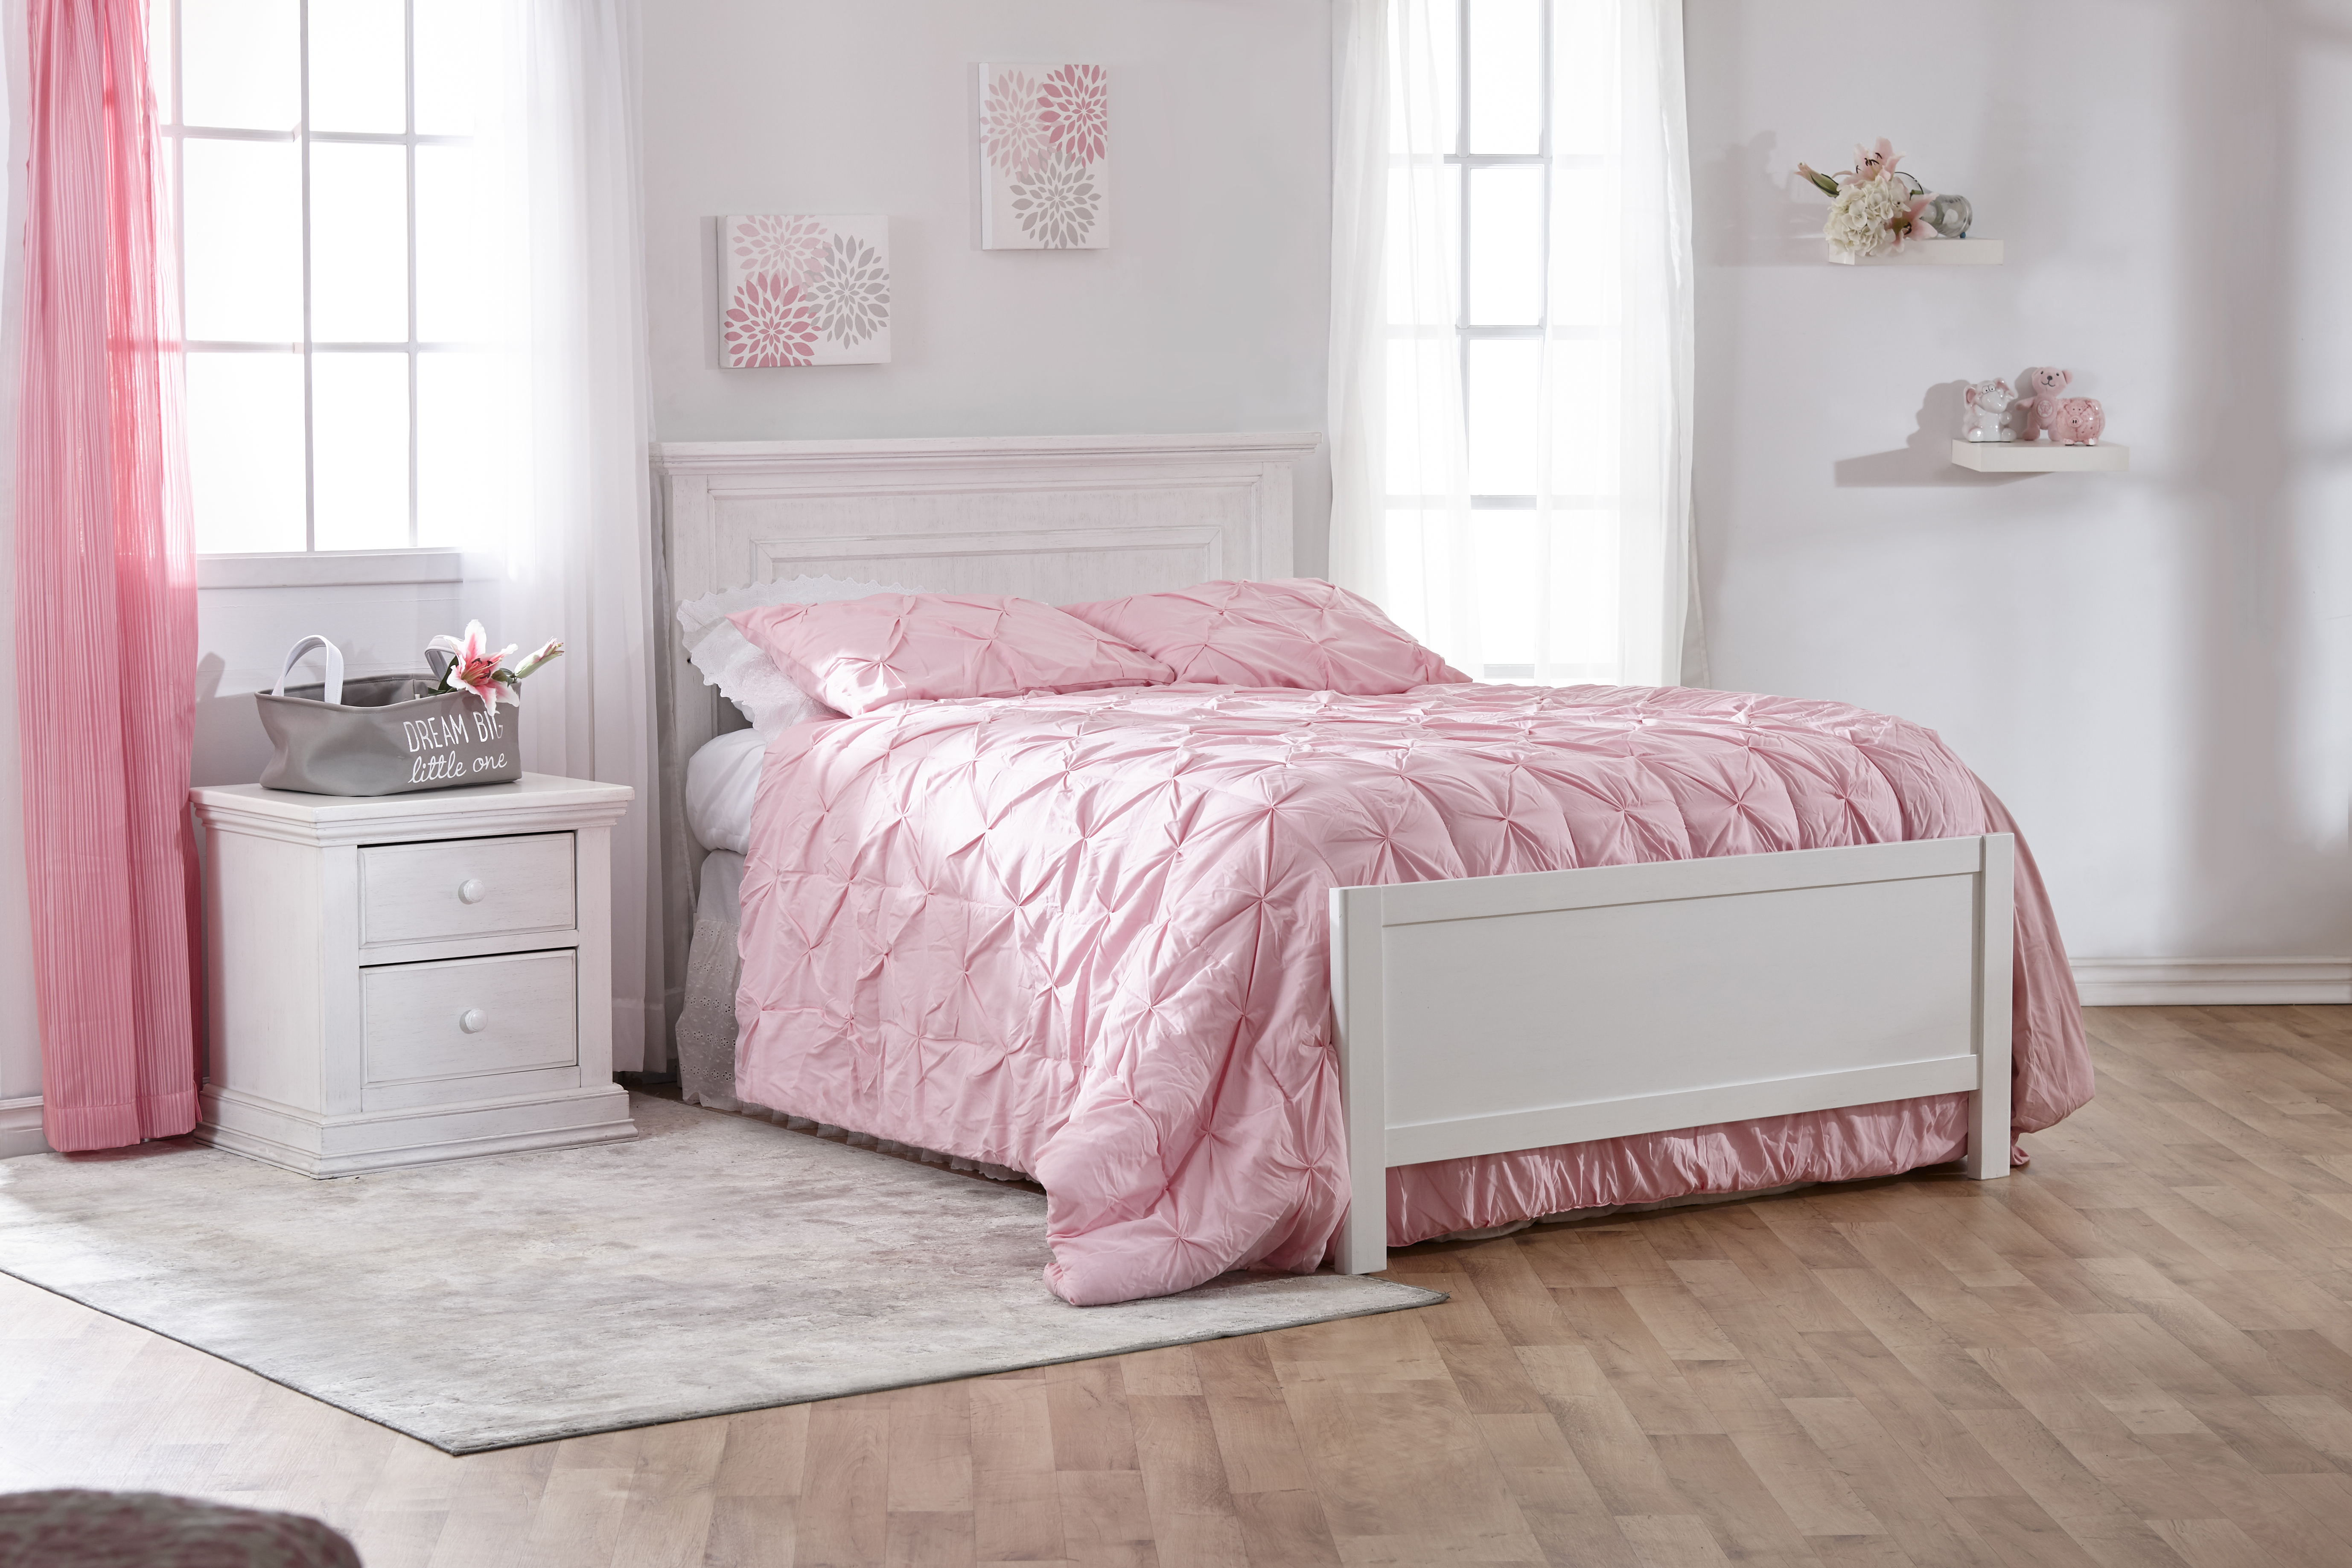 Now in Stock: The <b>Low Profile Footboard</b>. A fresh new look for your crib conversion! Here featured with the Modena Collection.